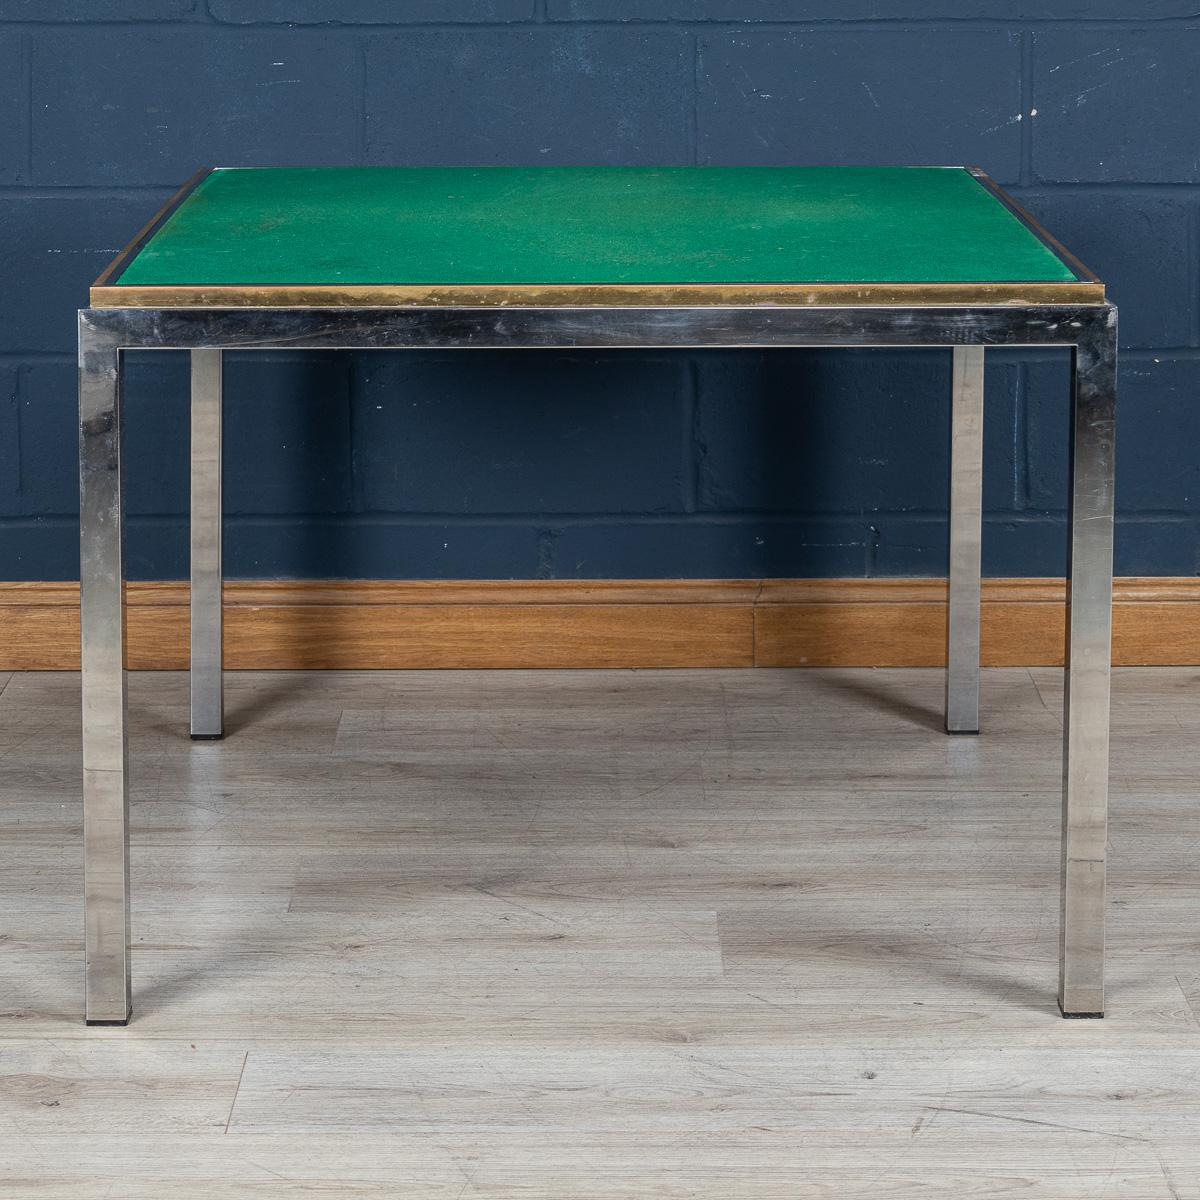 20th Century Metamorphic Games Table / Dining Table, Romeo Rega For Metalarte In Good Condition For Sale In Royal Tunbridge Wells, Kent